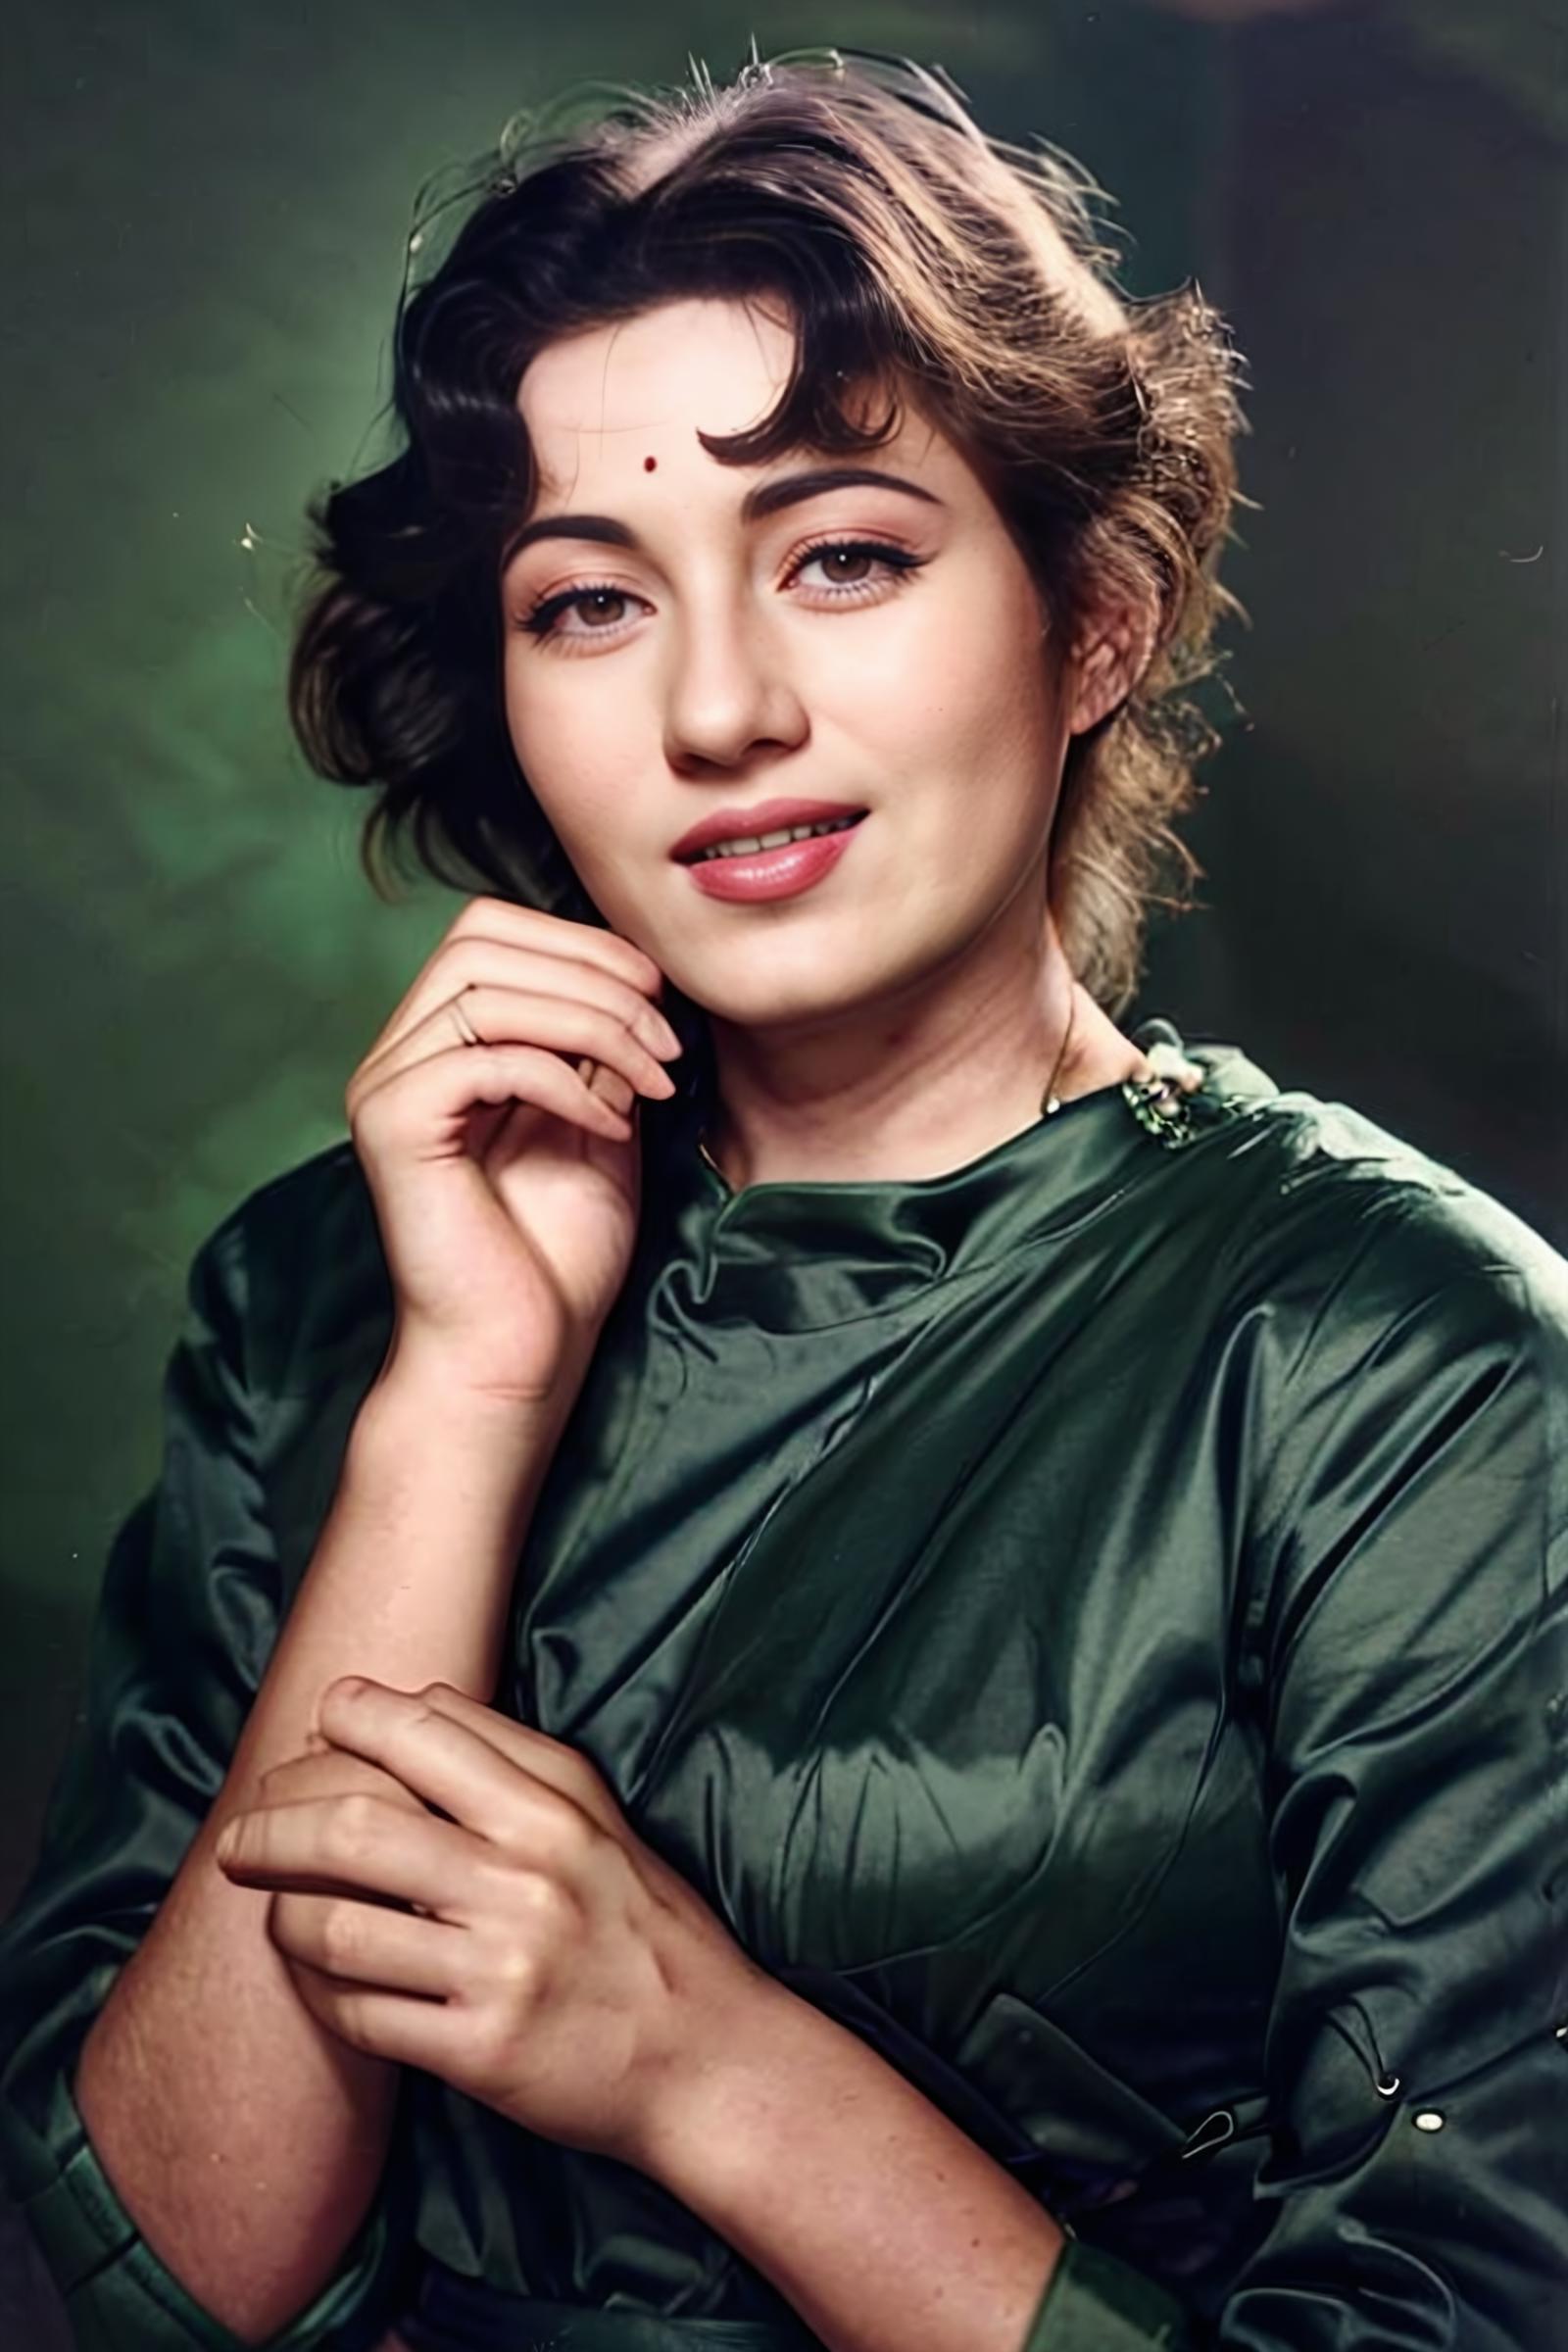 Nostalgia Series: Madhubala - Indian Actress from 40s-60s image by Desi_Cafe